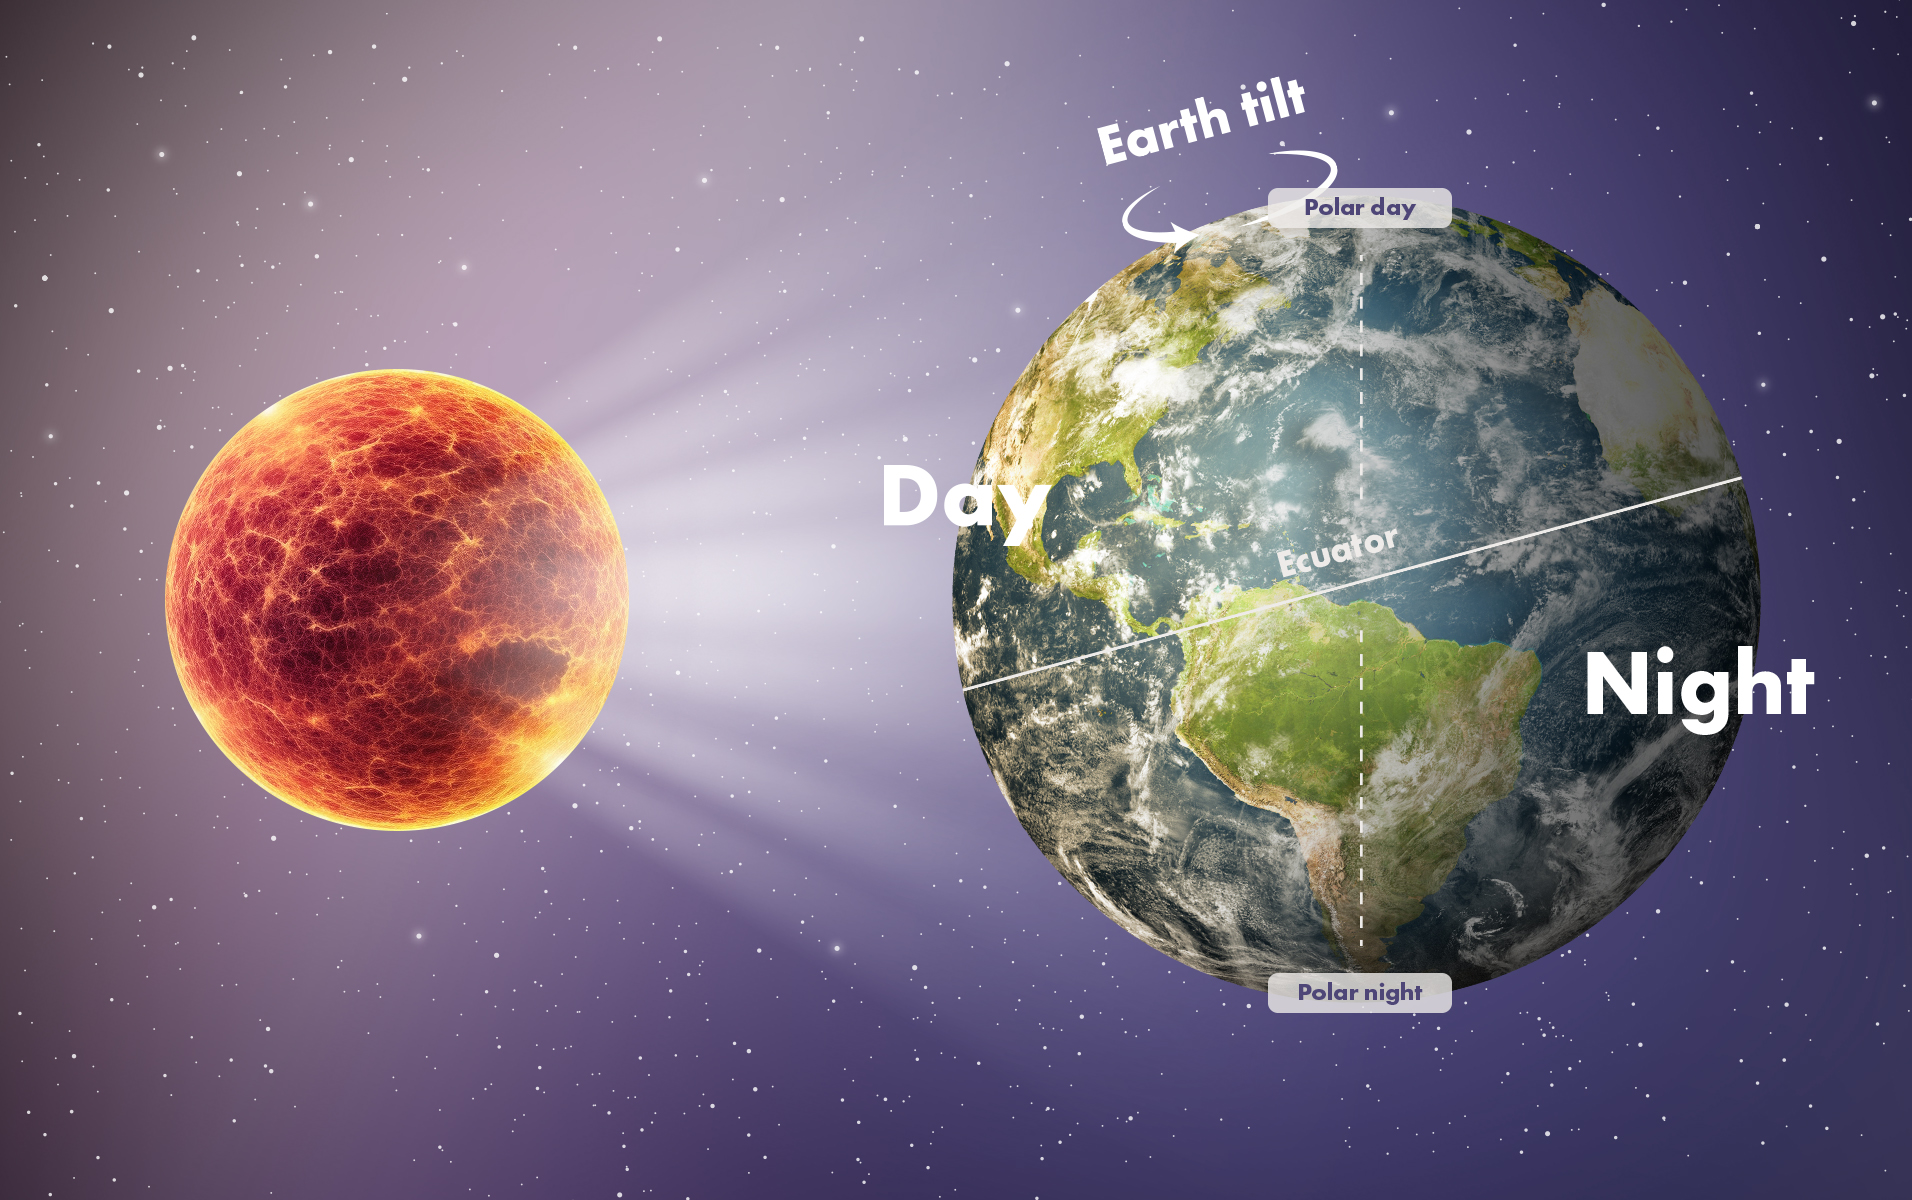 The comfortable planet: Why do we have day and night?